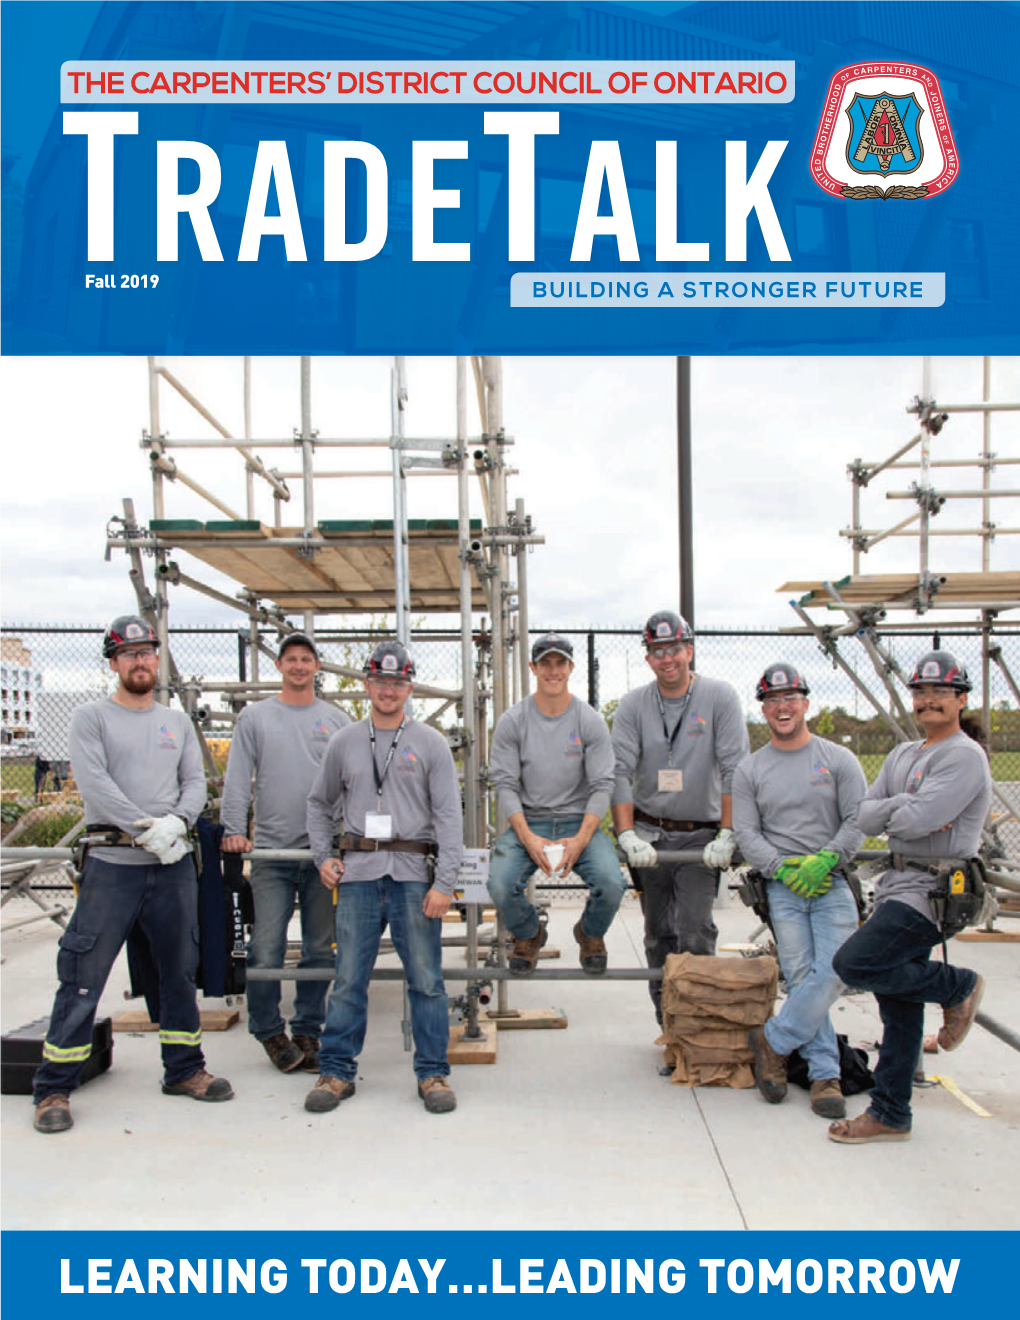 Tradetalk.Indd 1 10/9/19 9:29 AM NEW FEATURES HAVE BEEN ADDED to YOUR ONLINE MEMBER PORTAL and APP!